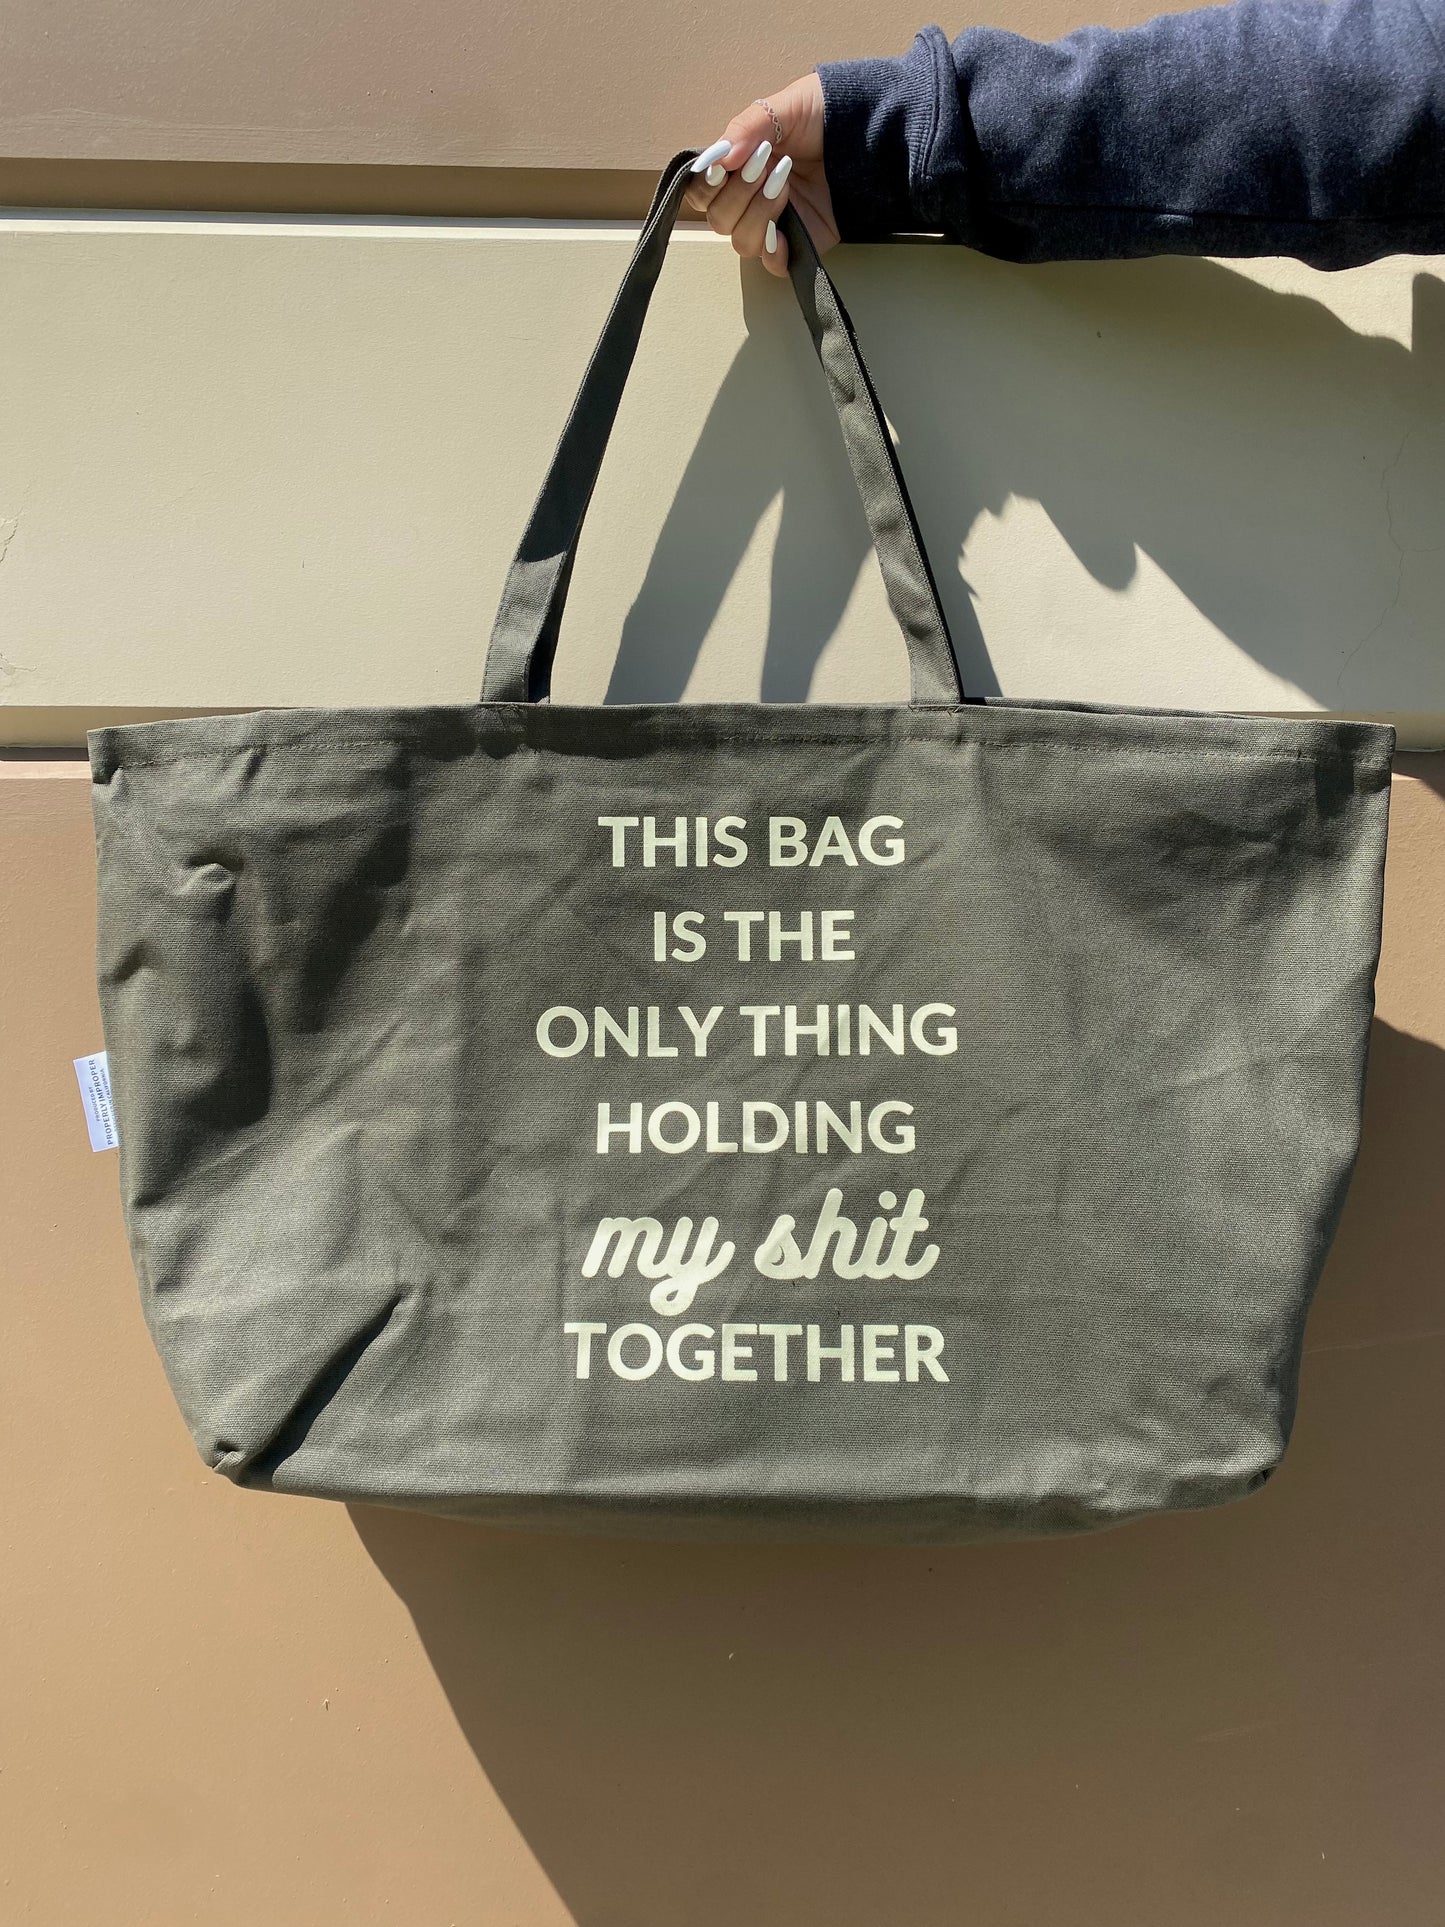 Do it together tote bag 